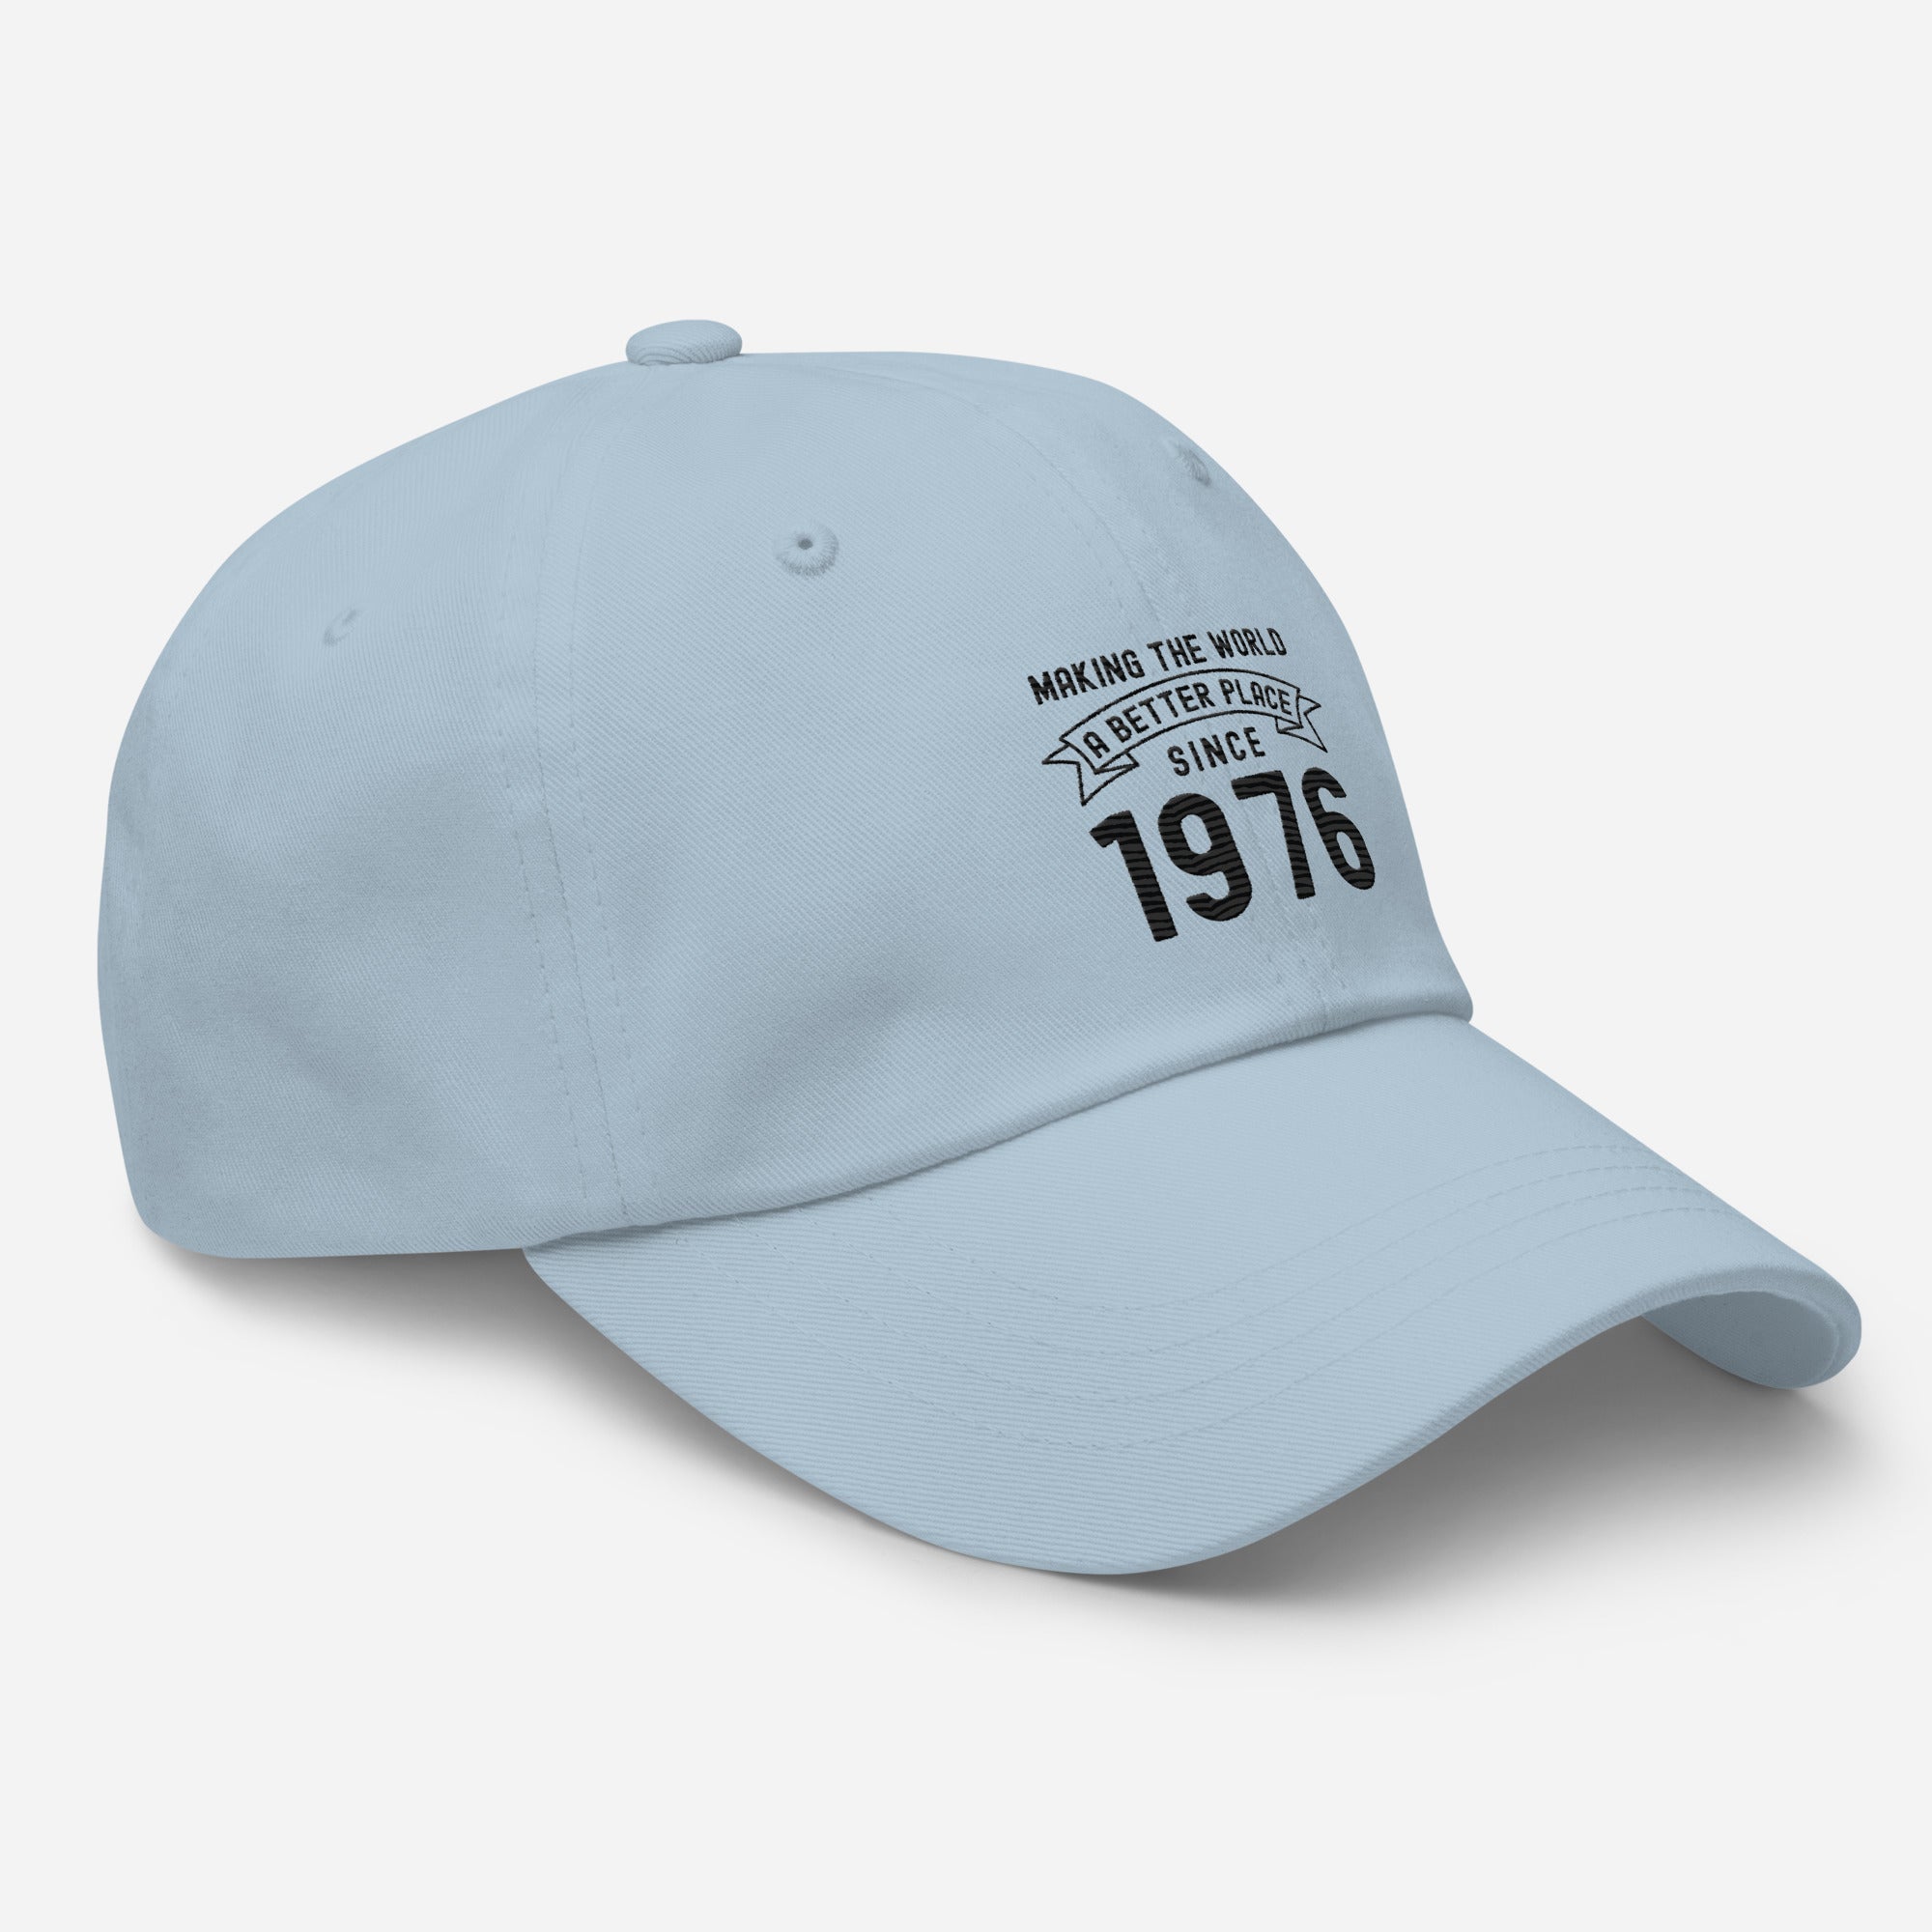 Hat | Making the world a better place since 1976